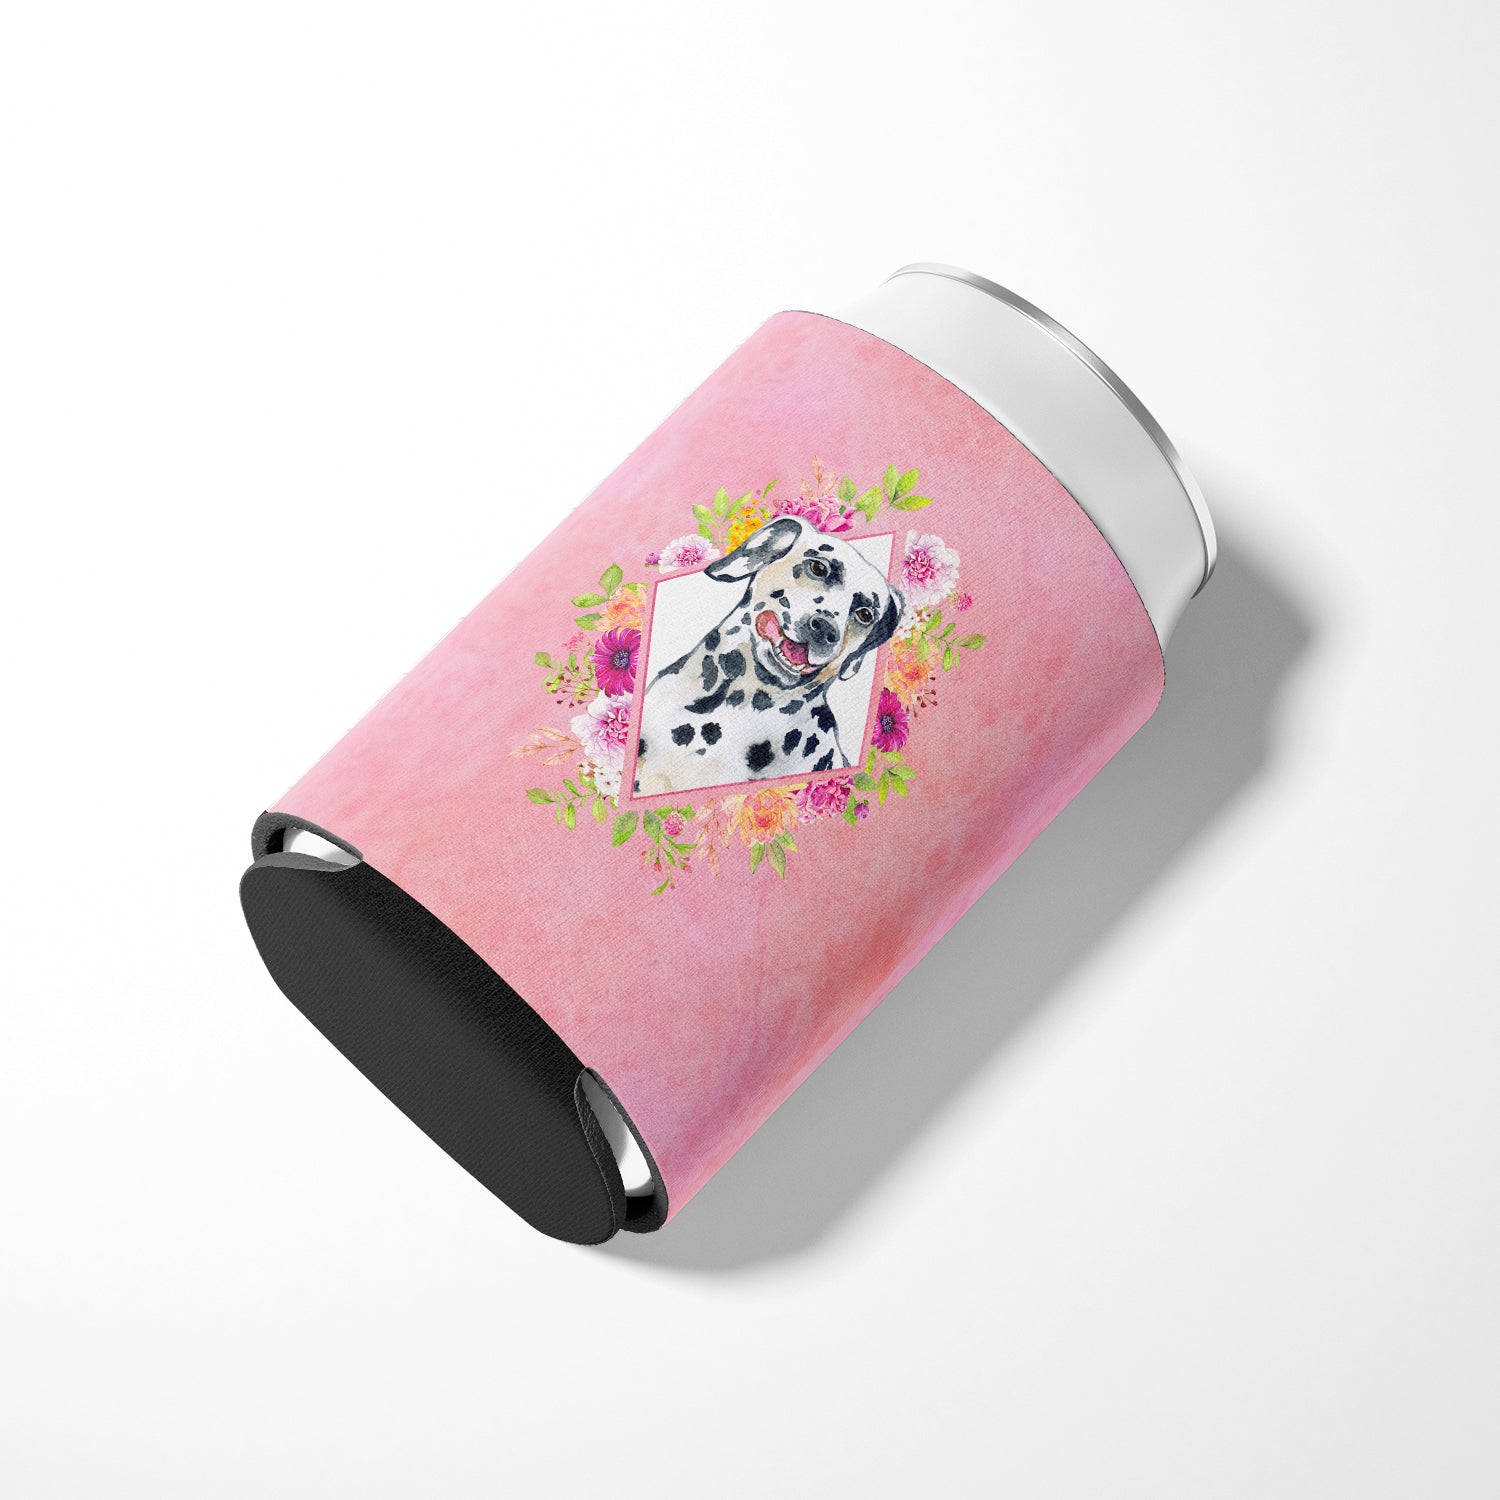 Dalmatian Pink Flowers Can or Bottle Hugger CK4137CC  the-store.com.